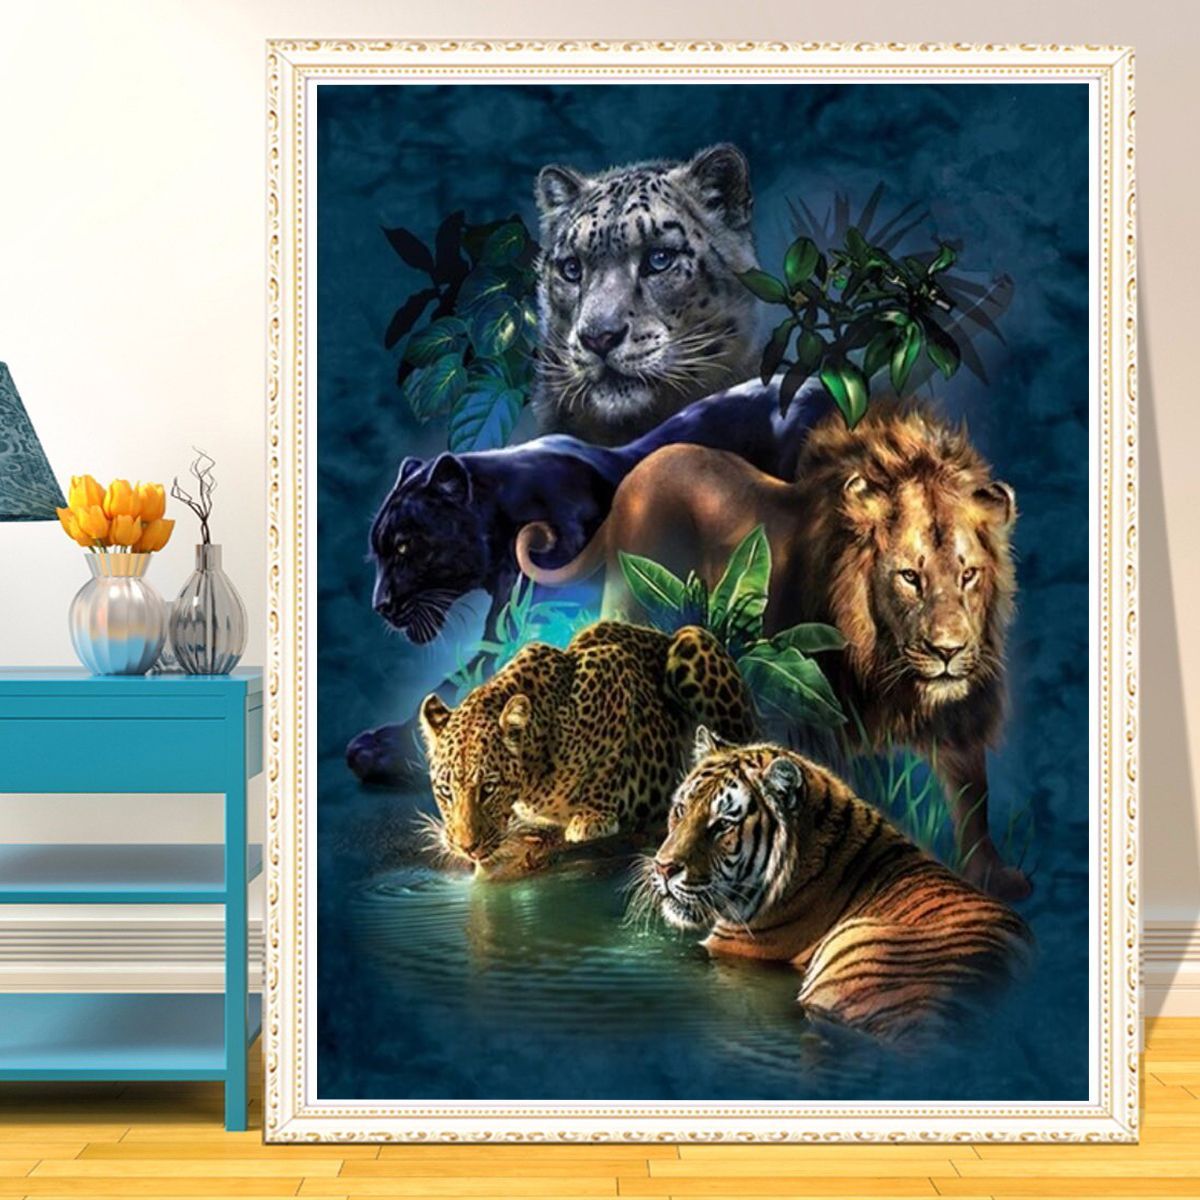 DIY-5D-Diamond-Paintings-Tiger-Lion-Embroidery-Cross-Crafts-Stitch-Tool-Kit-1633482